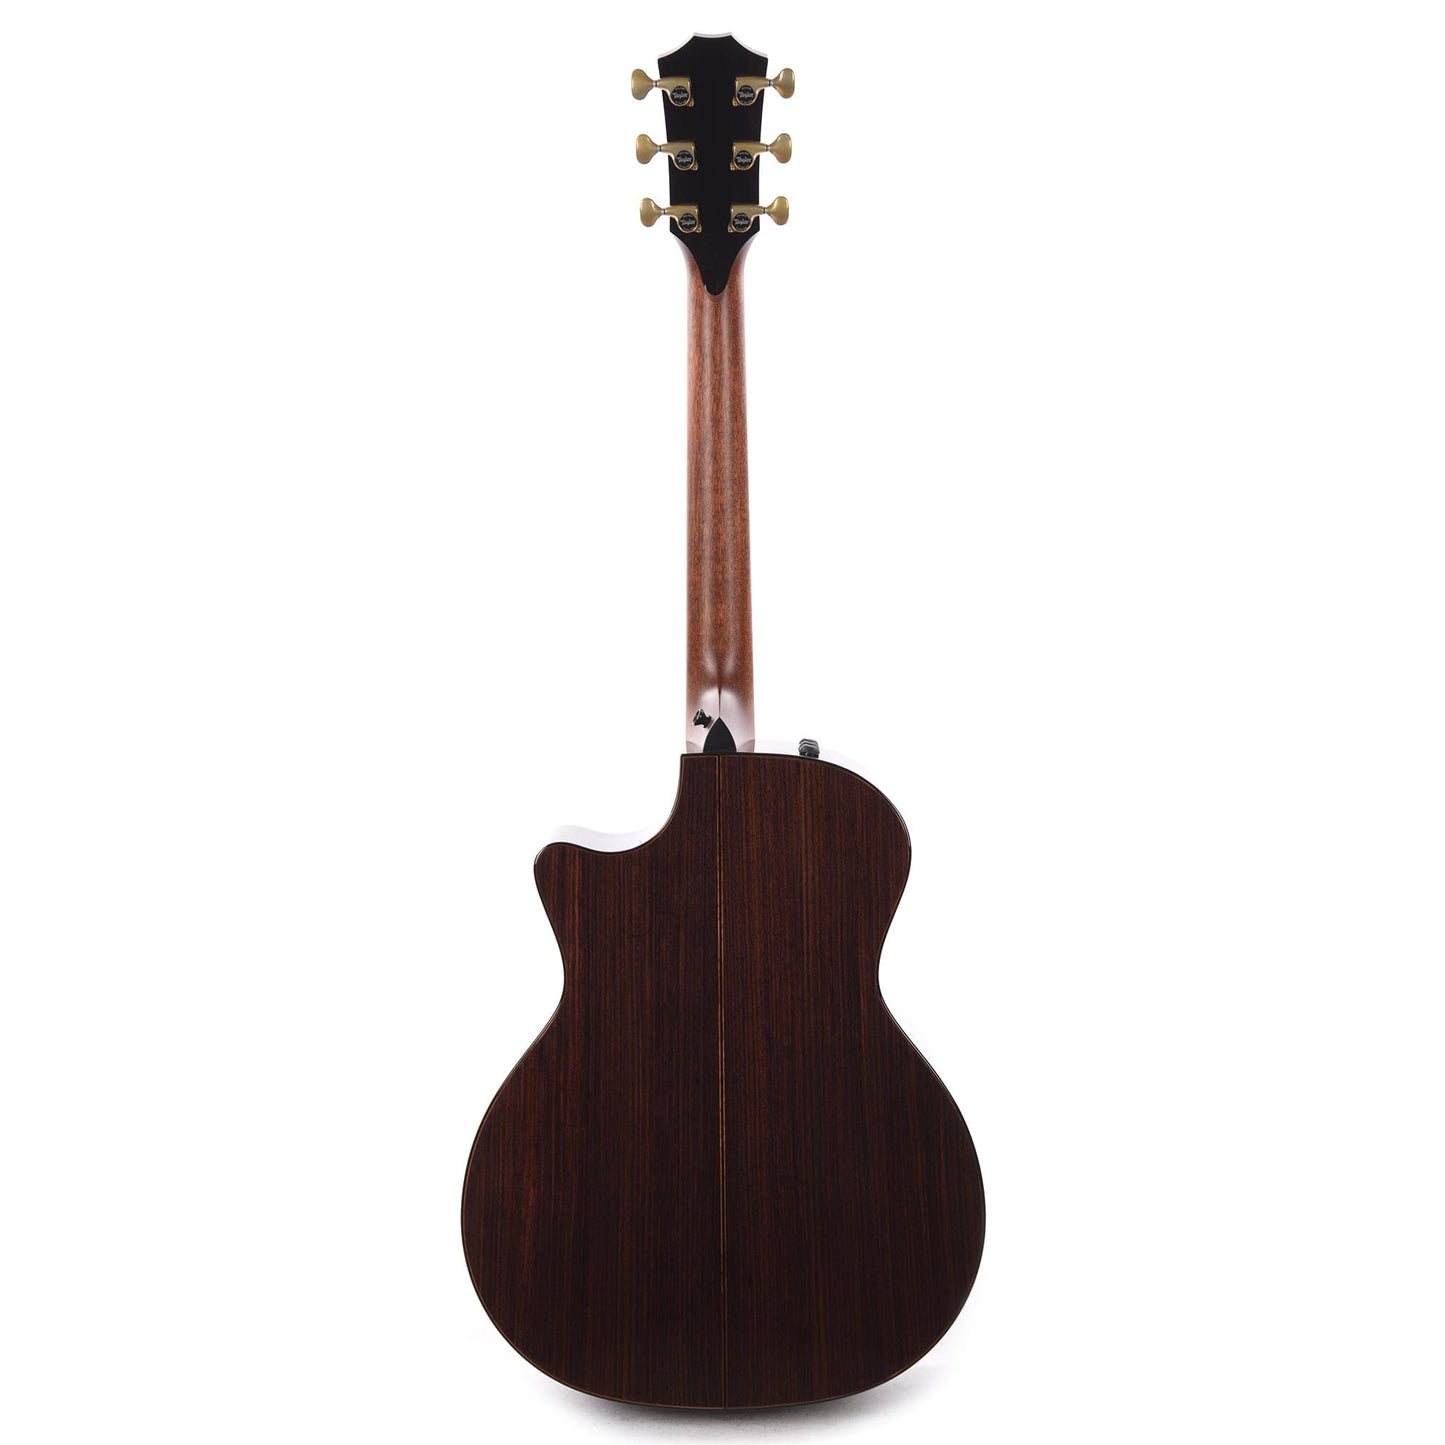 Taylor Custom "Catch" 2023 #020 Grand Auditorium Sitka/AA Rosewood Charcoal Black Top Acoustic Guitars / OM and Auditorium